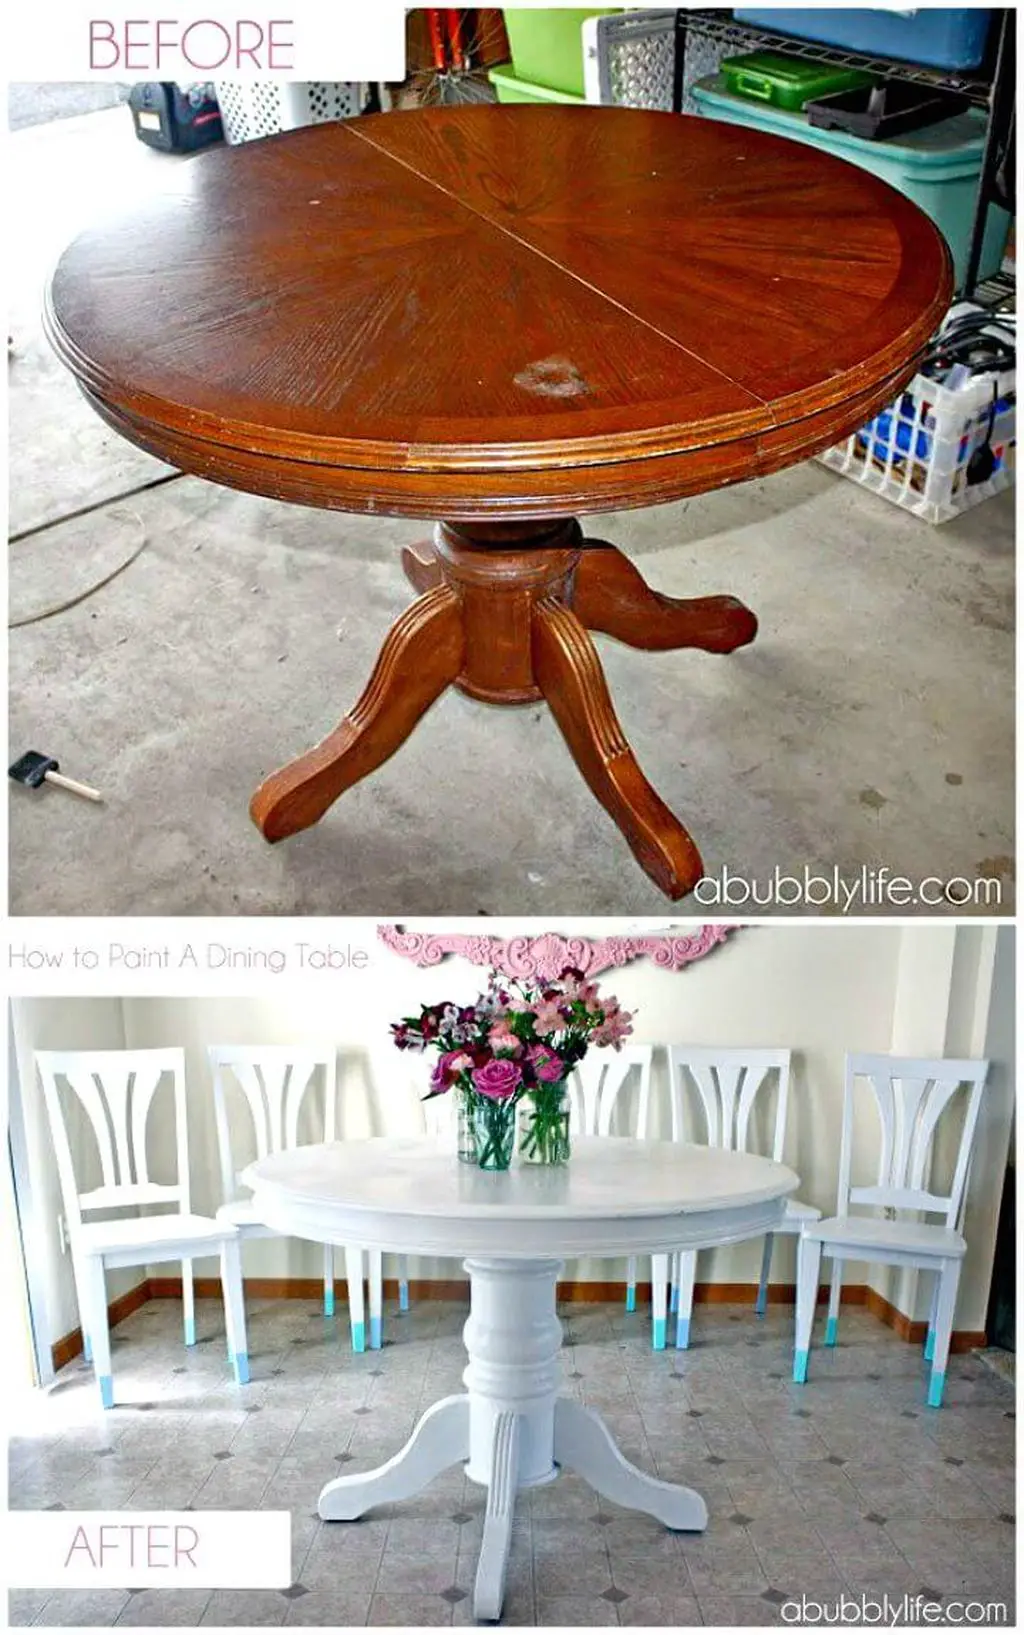 8 Table Makeover Ideas To Upgrade Your Table Talkdecor